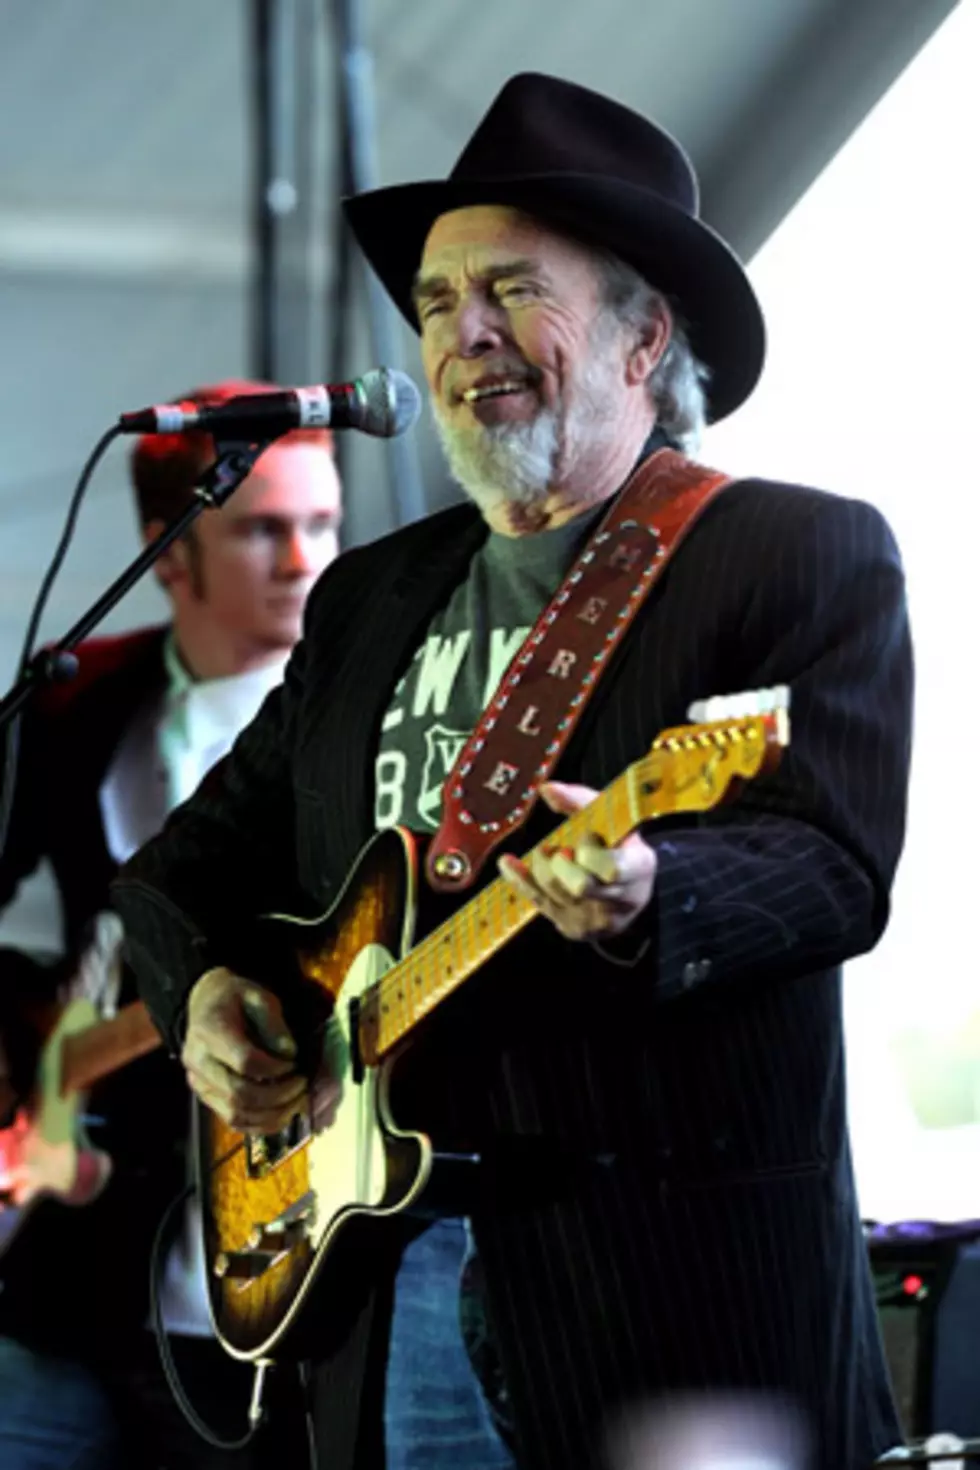 Merle Haggard to Be Released From Hospital